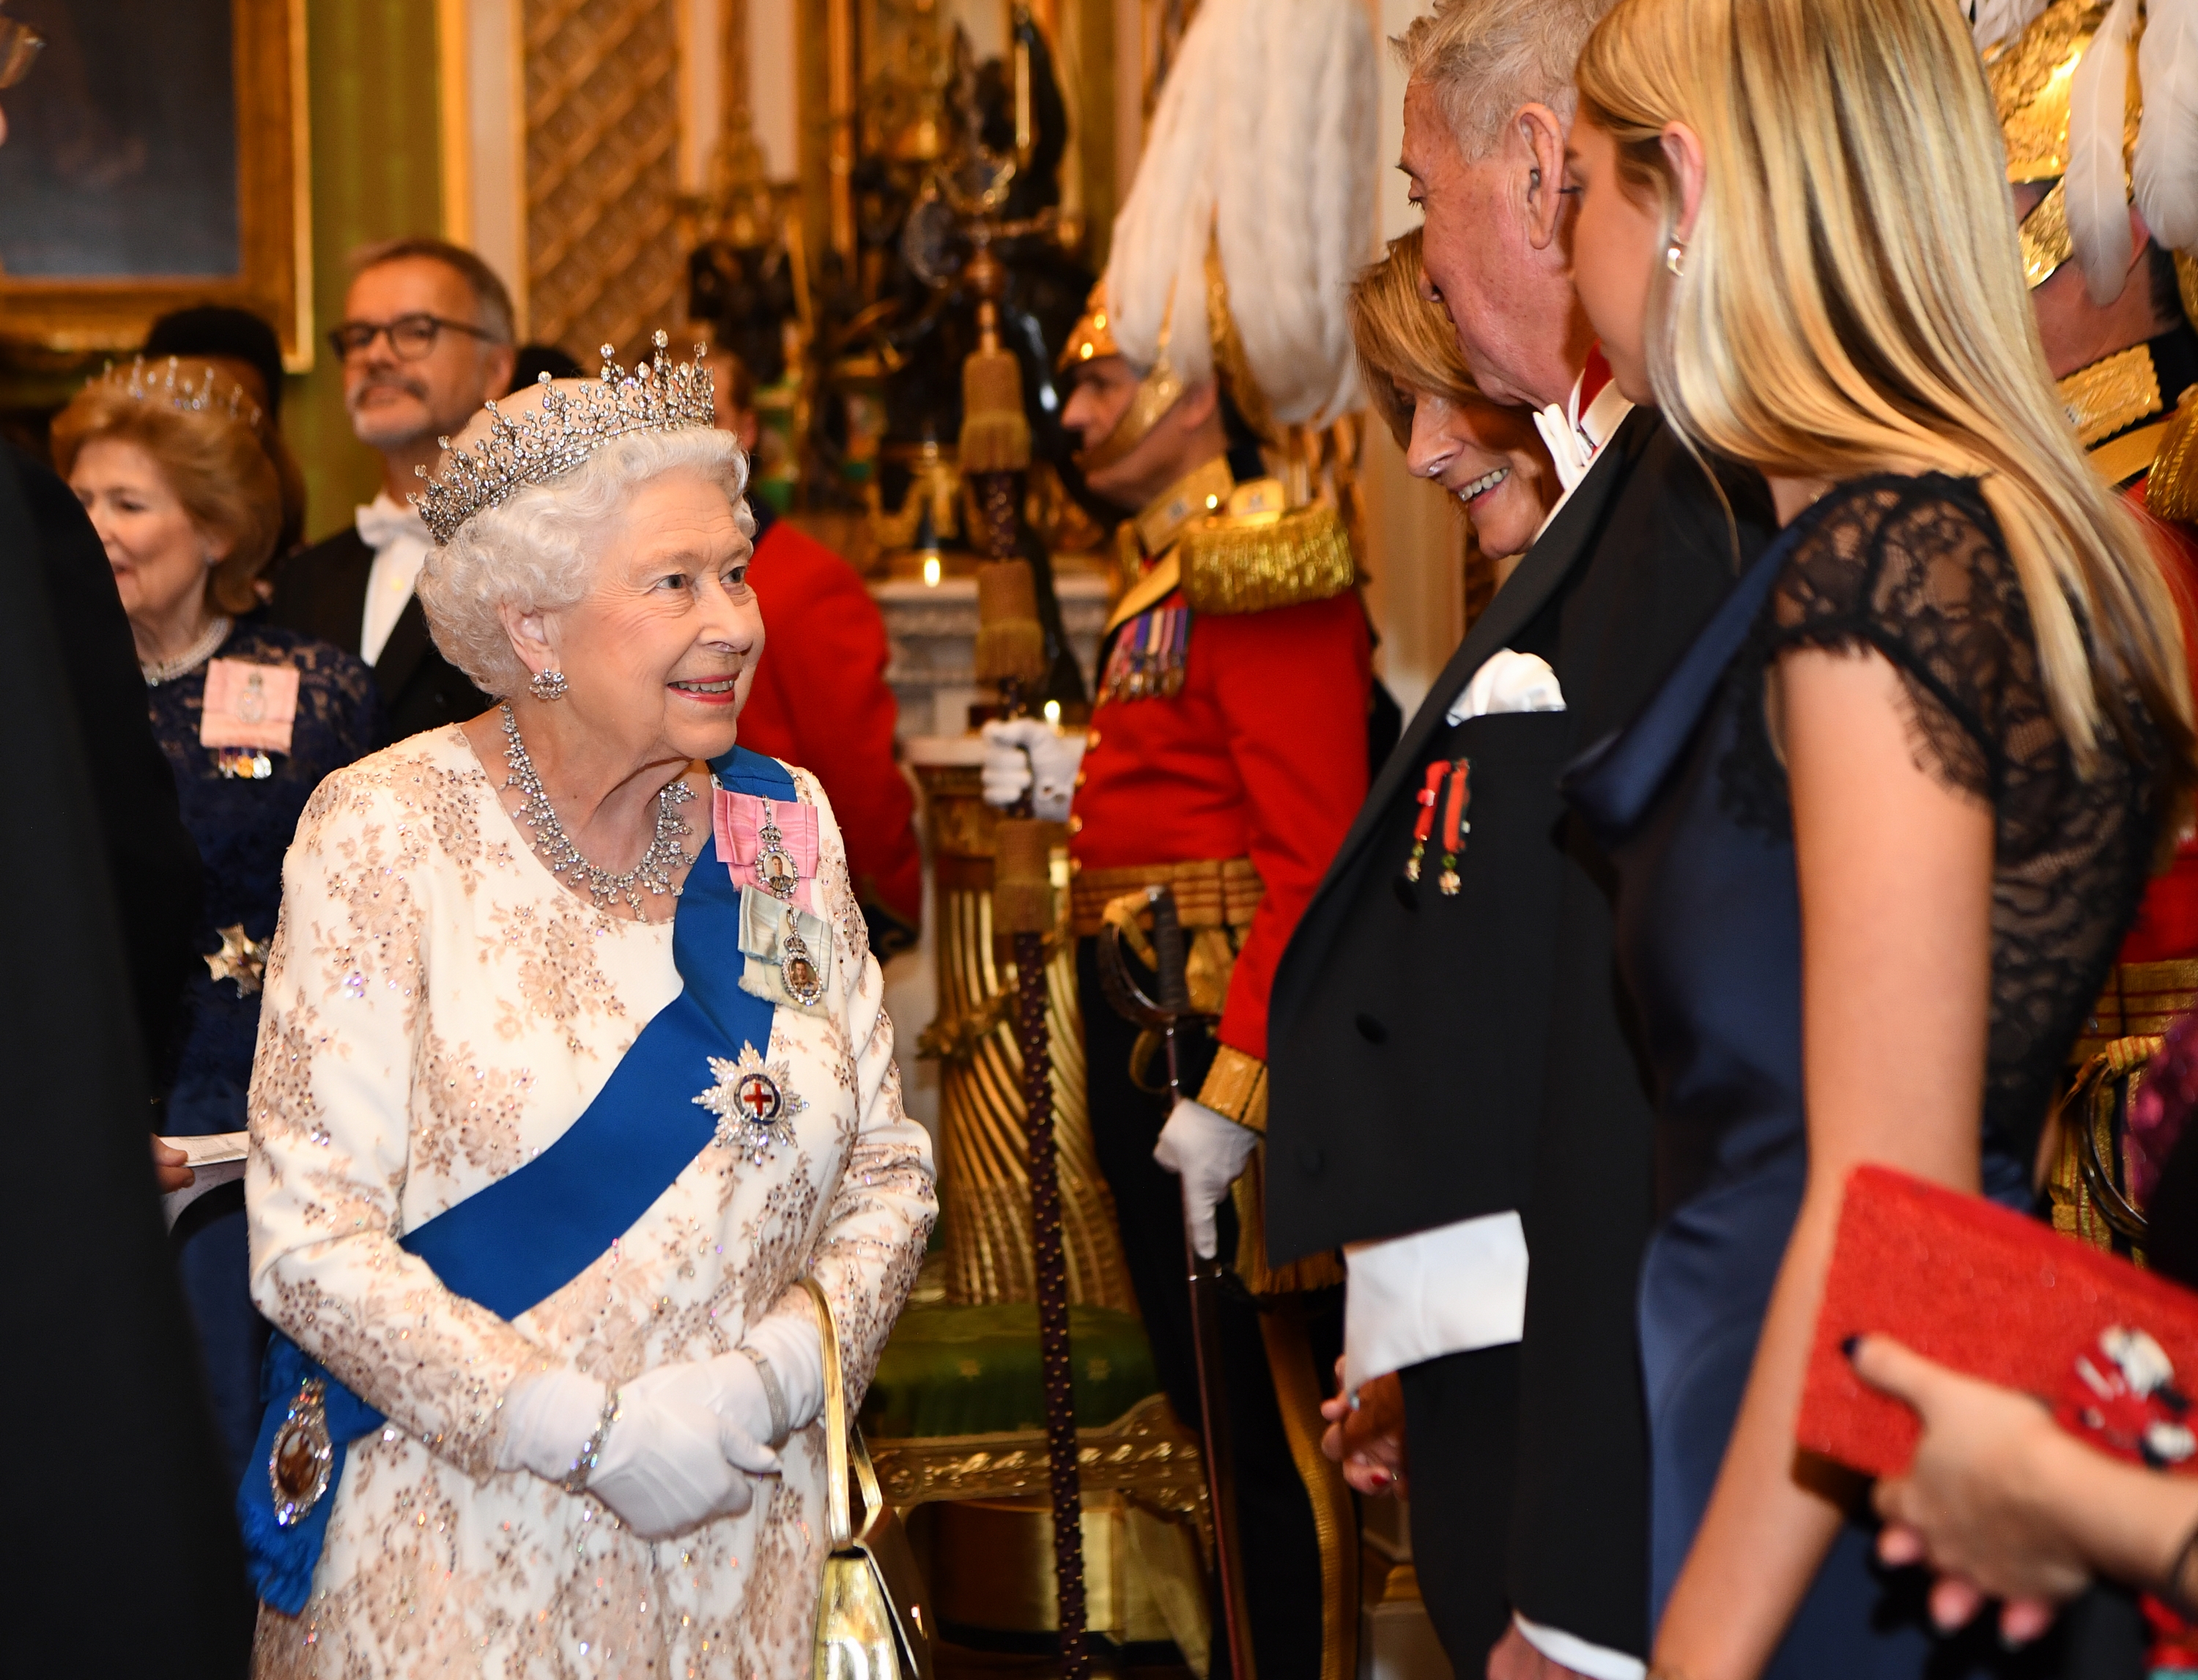 The Duke & Duchess Of Cambridge Attend Evening Reception For Members of the Diplomatic Corps